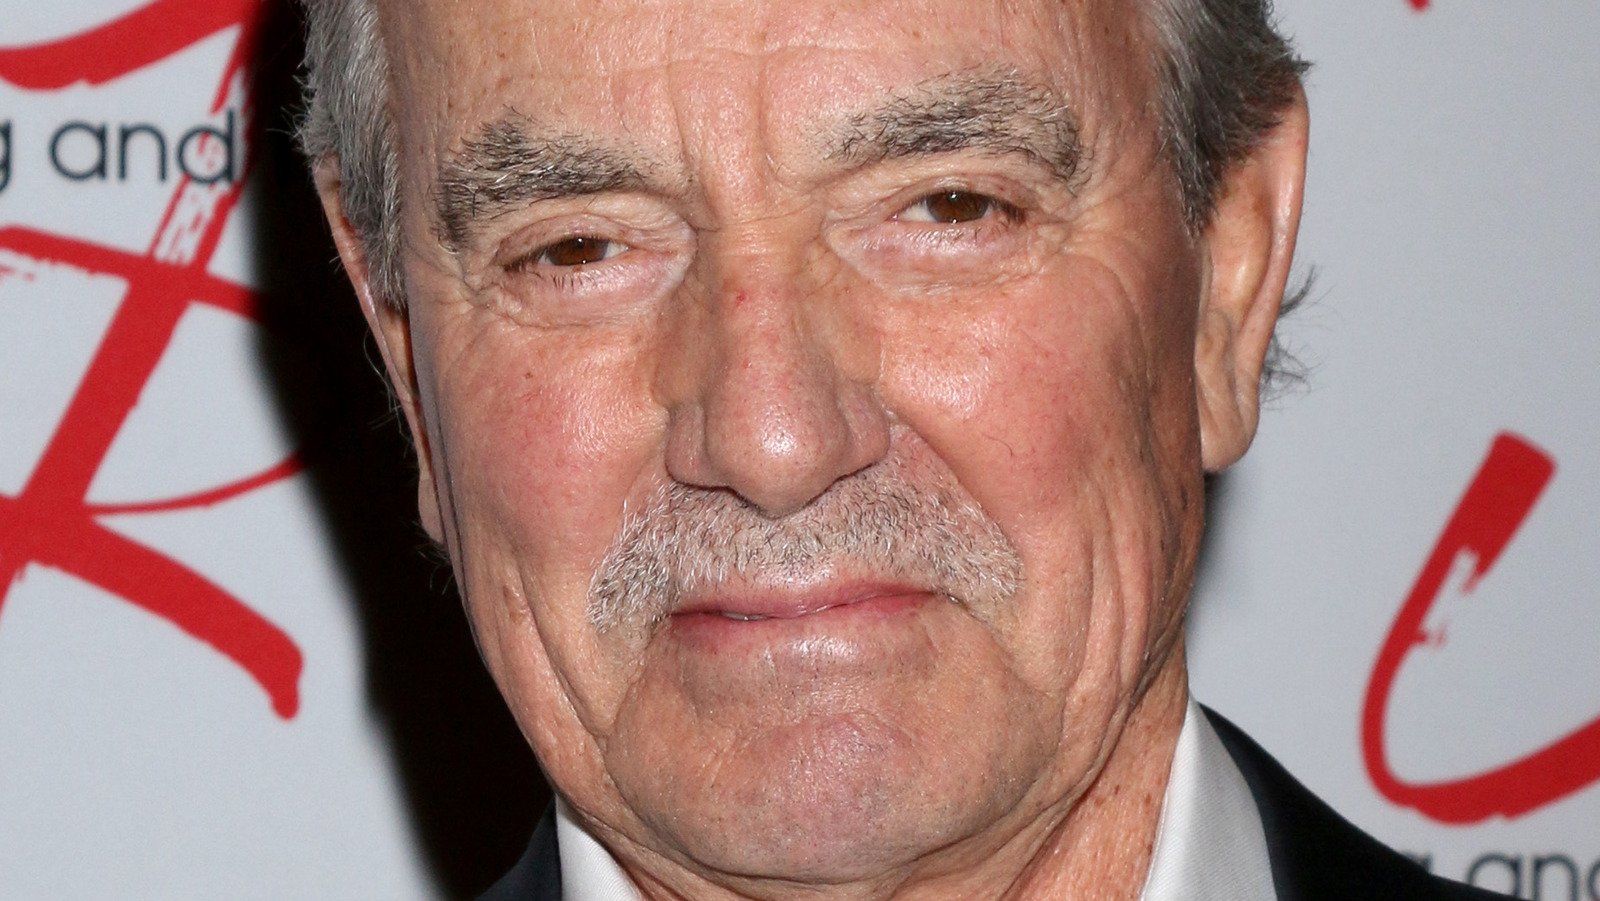 What The Young And The Restless Star Eric Braeden Really Thinks Of Donald Trump